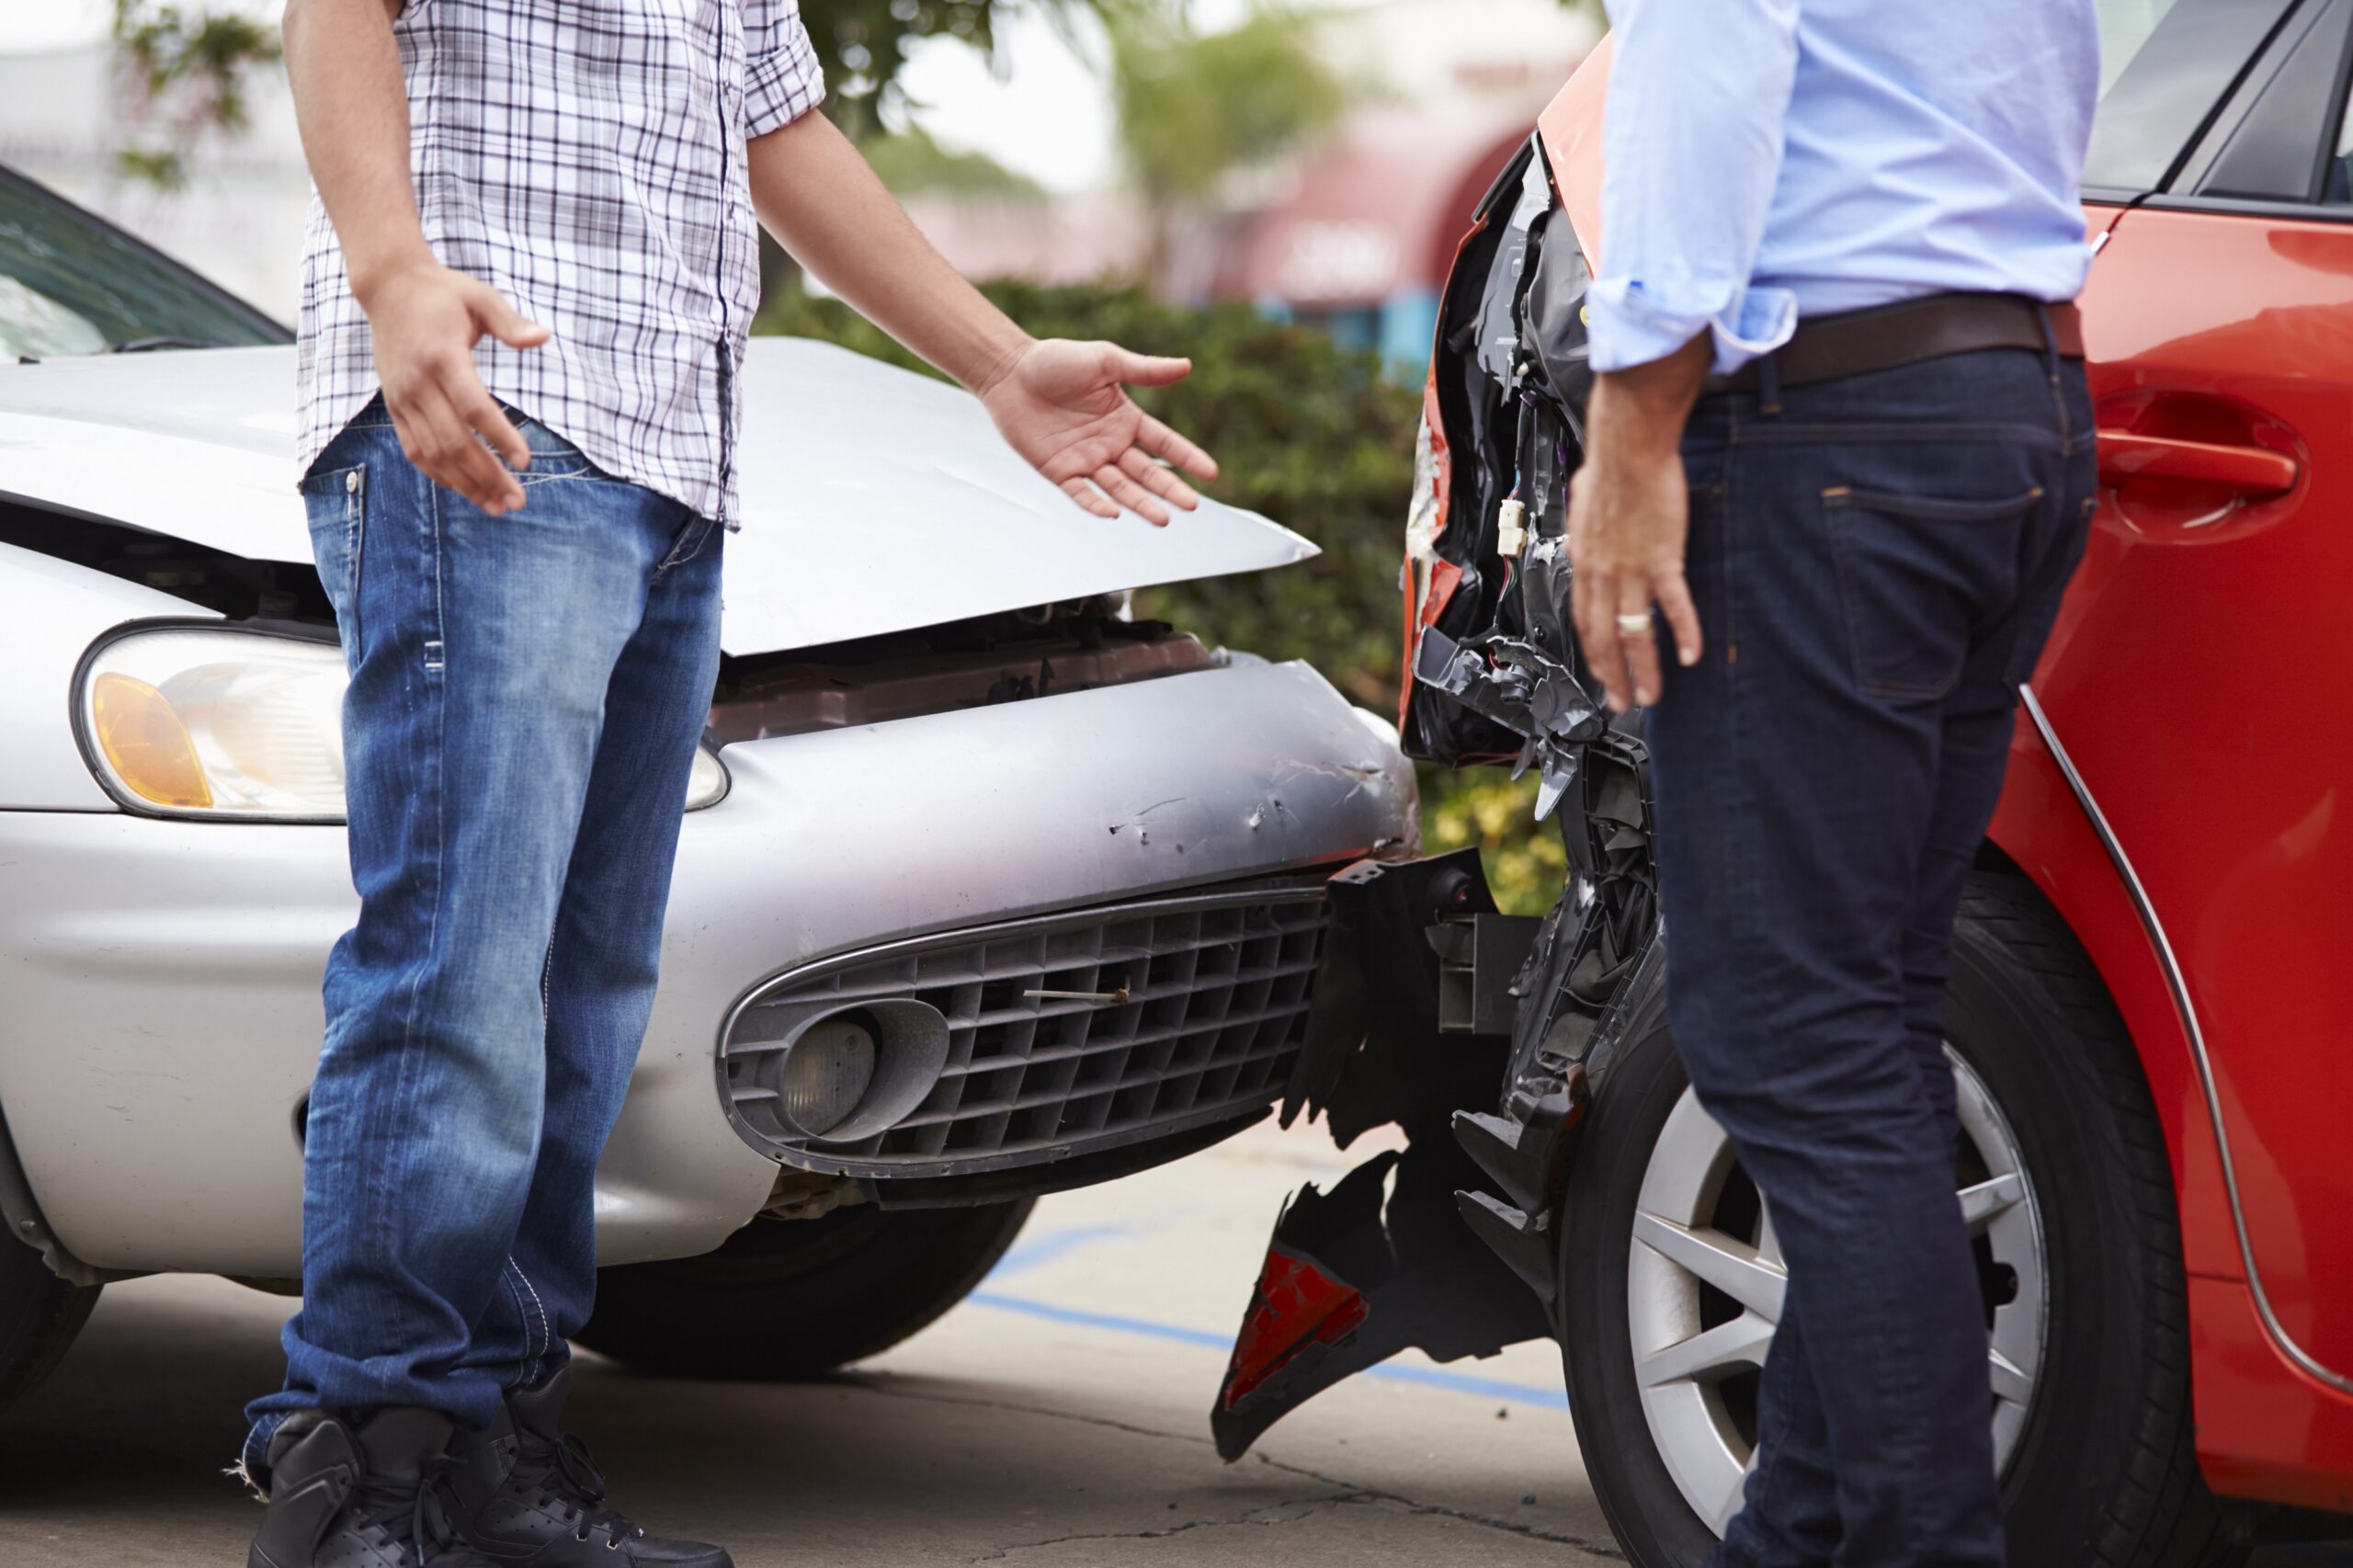 What Should You Do After You Have Been in a Car Accident?